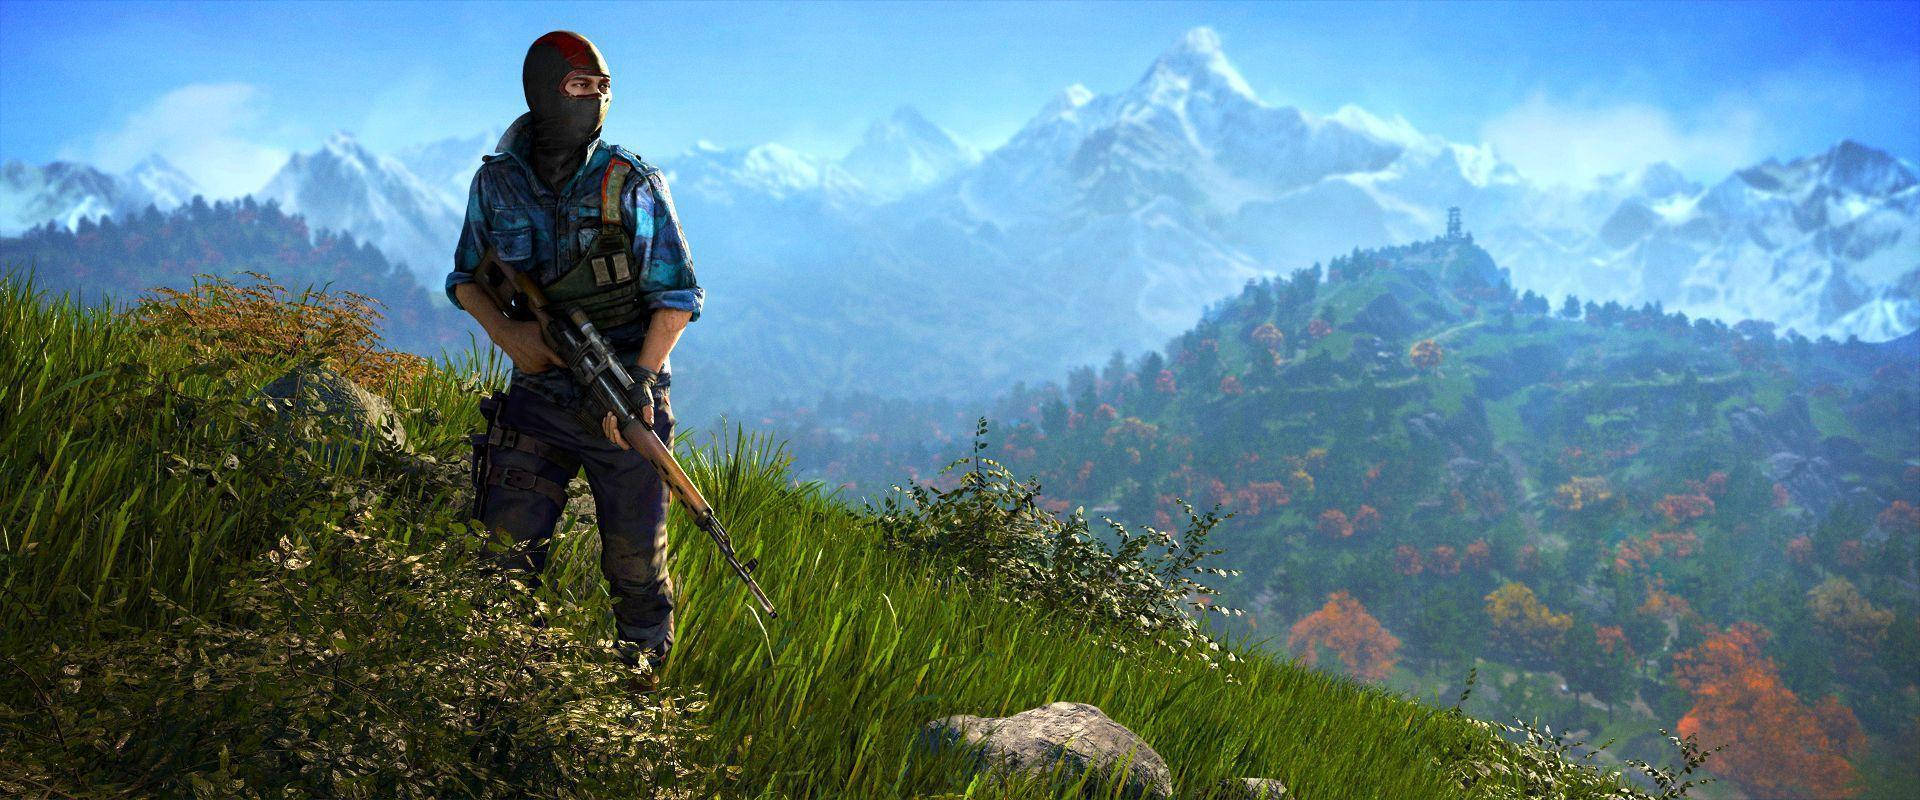 Guarding With Riffle Far Cry Gaming Background